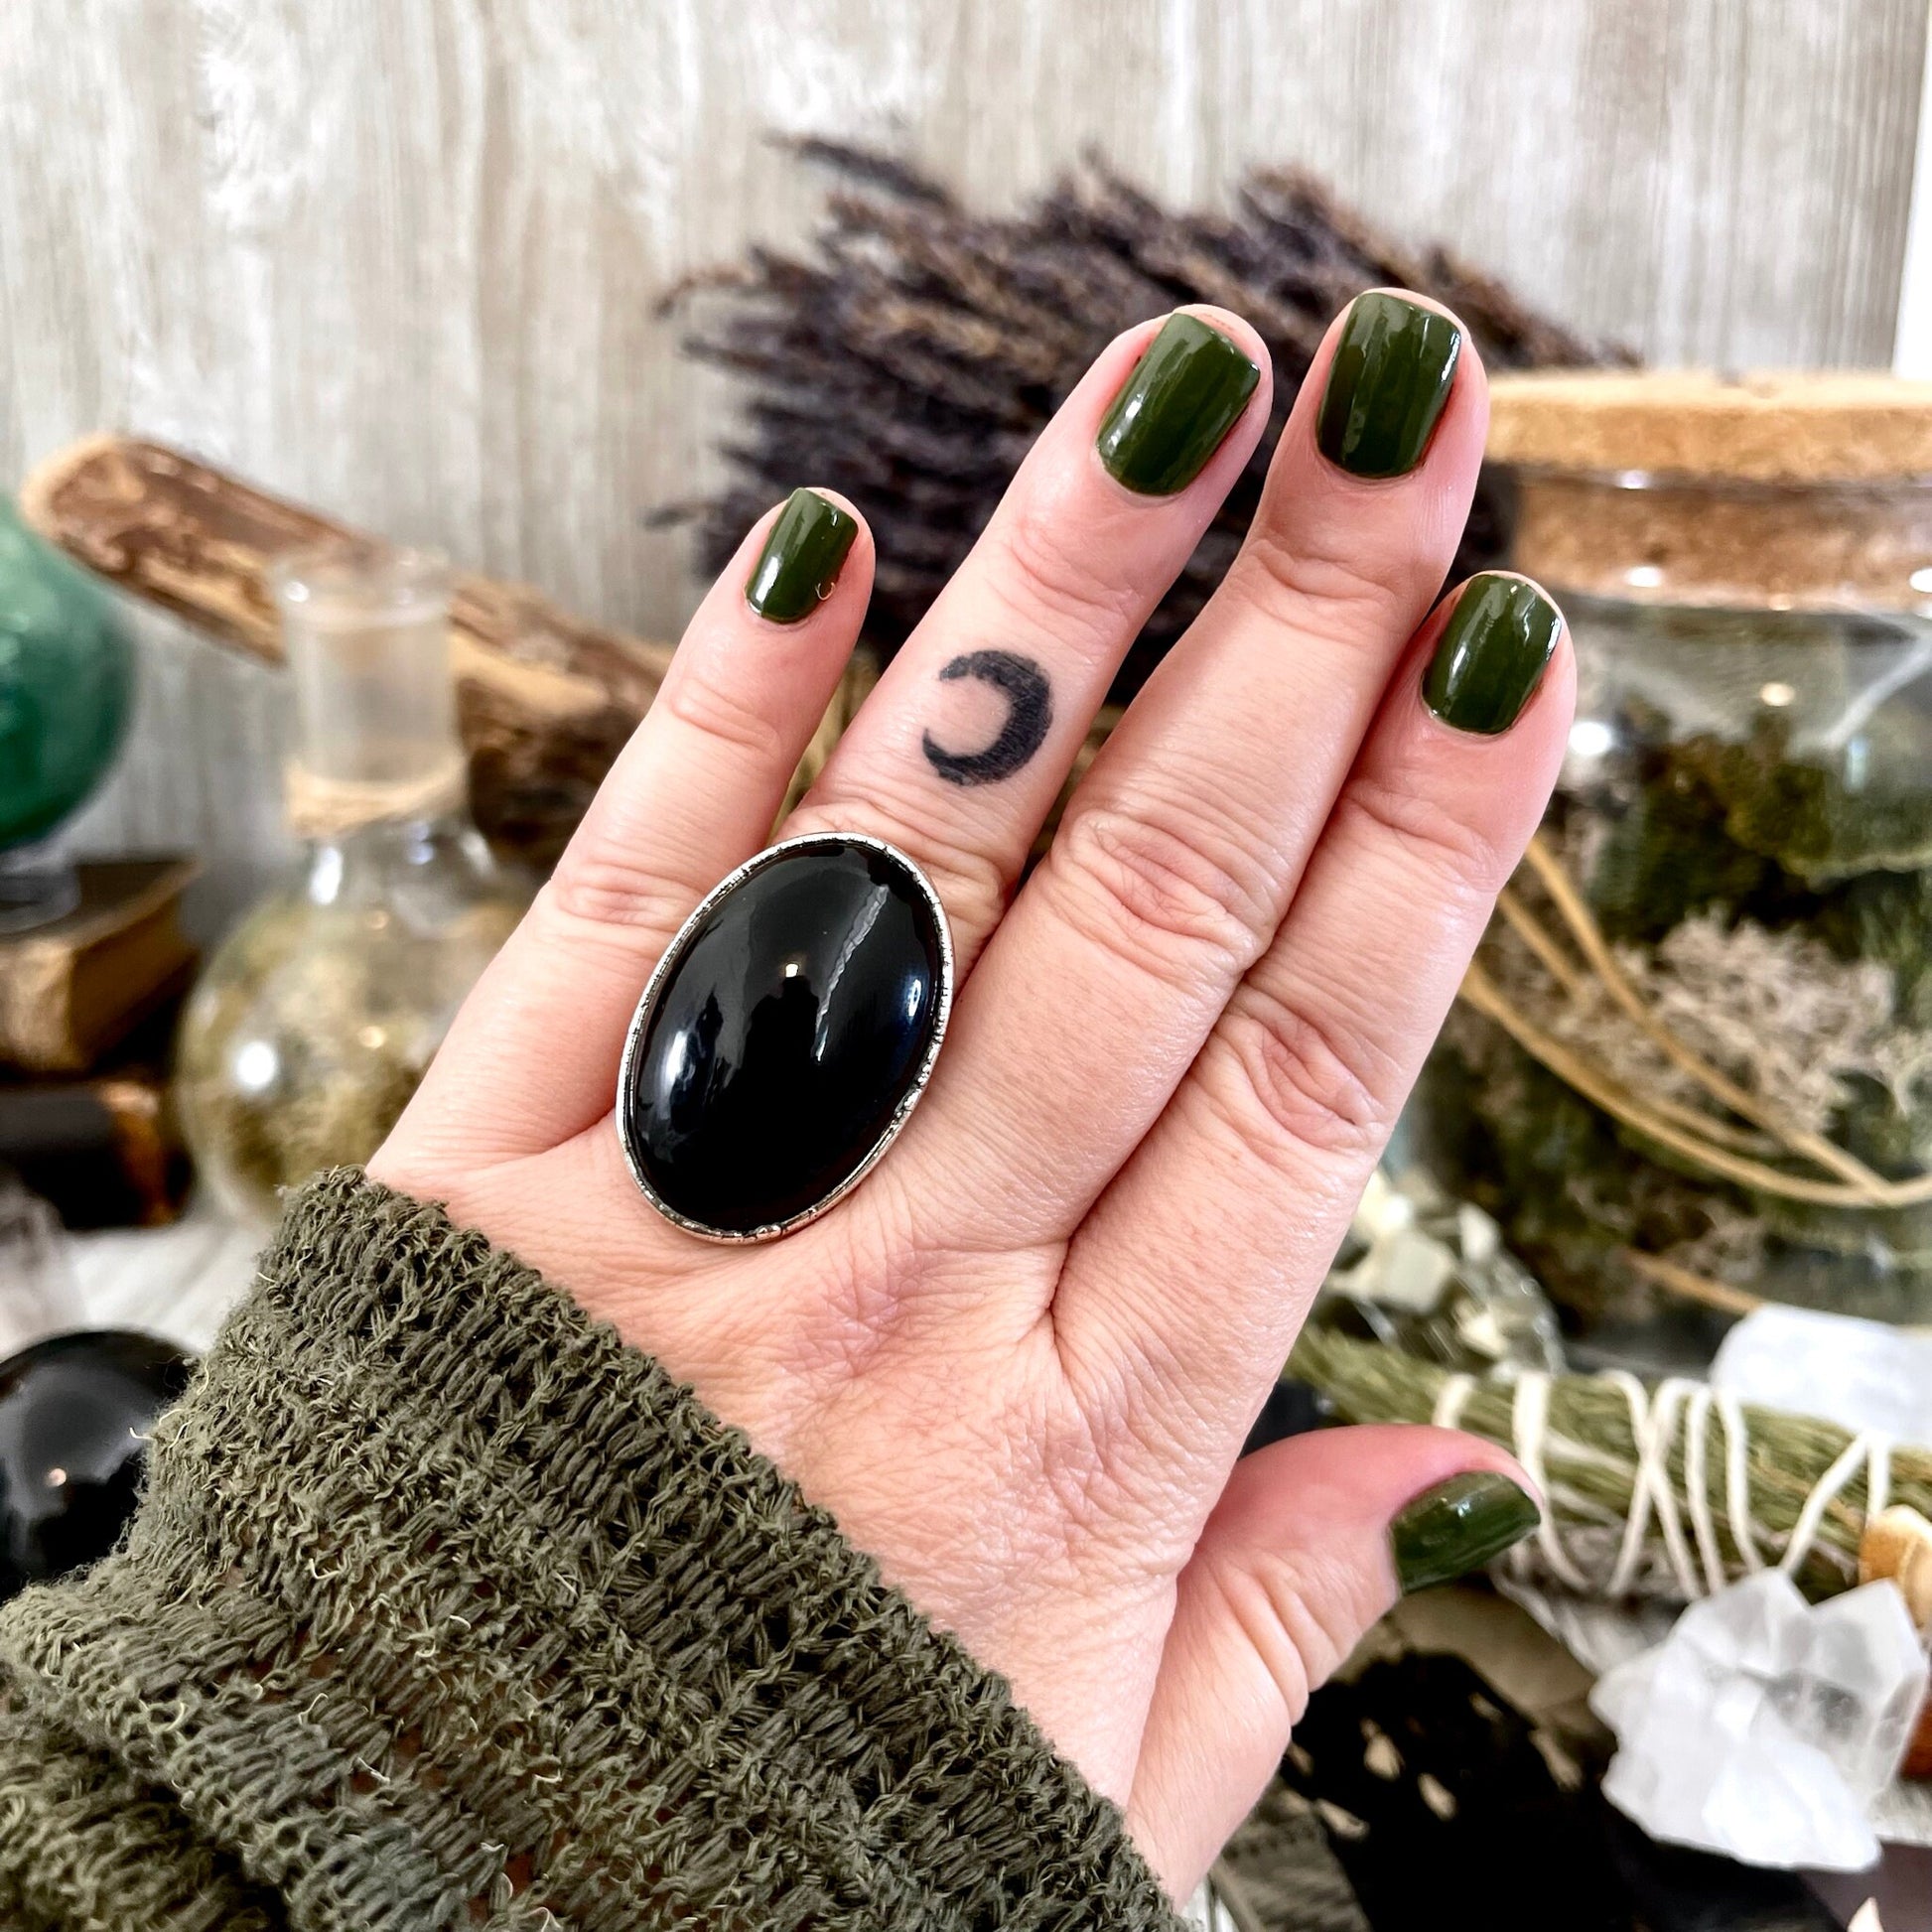 Big Bold Jewelry, Big Crystal Ring, Big Silver Ring, Big Statement Ring, Big Stone Ring, Bohemian Jewelry, Etsy ID: 1599135294, FOXLARK- RINGS, Jewelry, Large Boho Ring, Large Crystal Ring, Natural stone ring, Rainbow Obsidian, Rings, silver crystal ring,